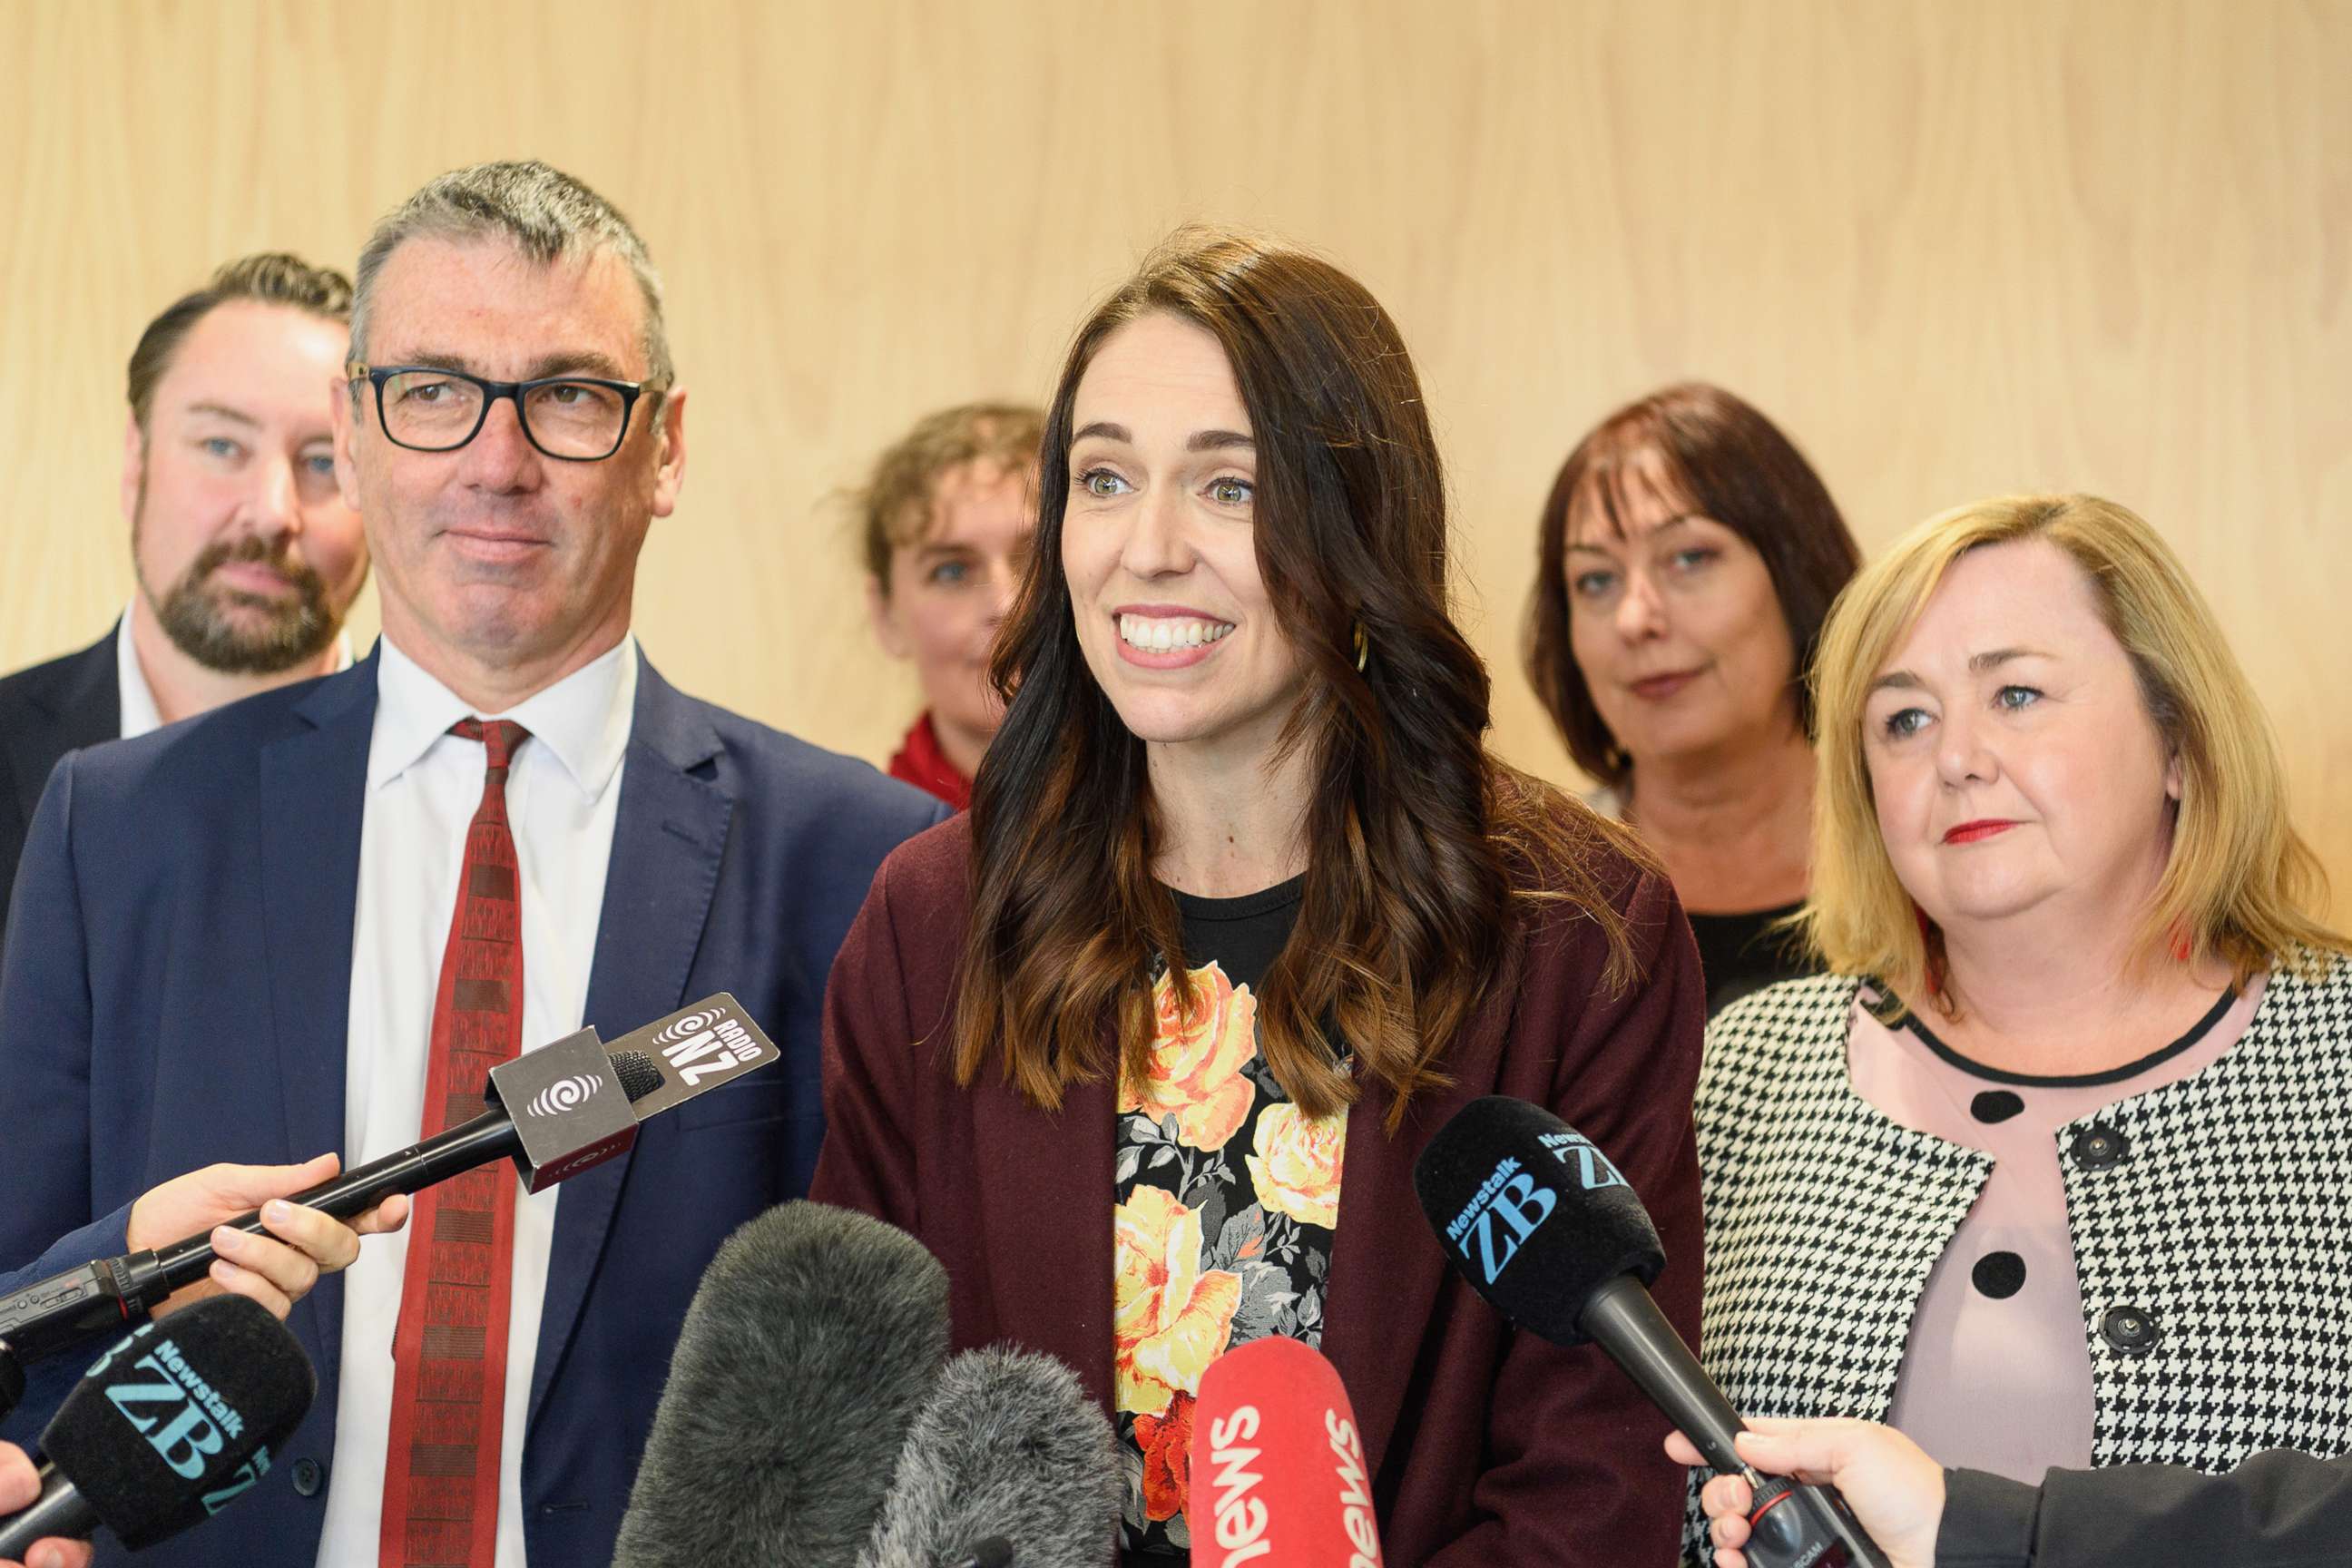 PHOTO: New Zealand Prime Minister Jacinda Ardern speaks to the media following a walkabout in the CBD on Oct. 14, 2020, in Christchurch, New Zealand.